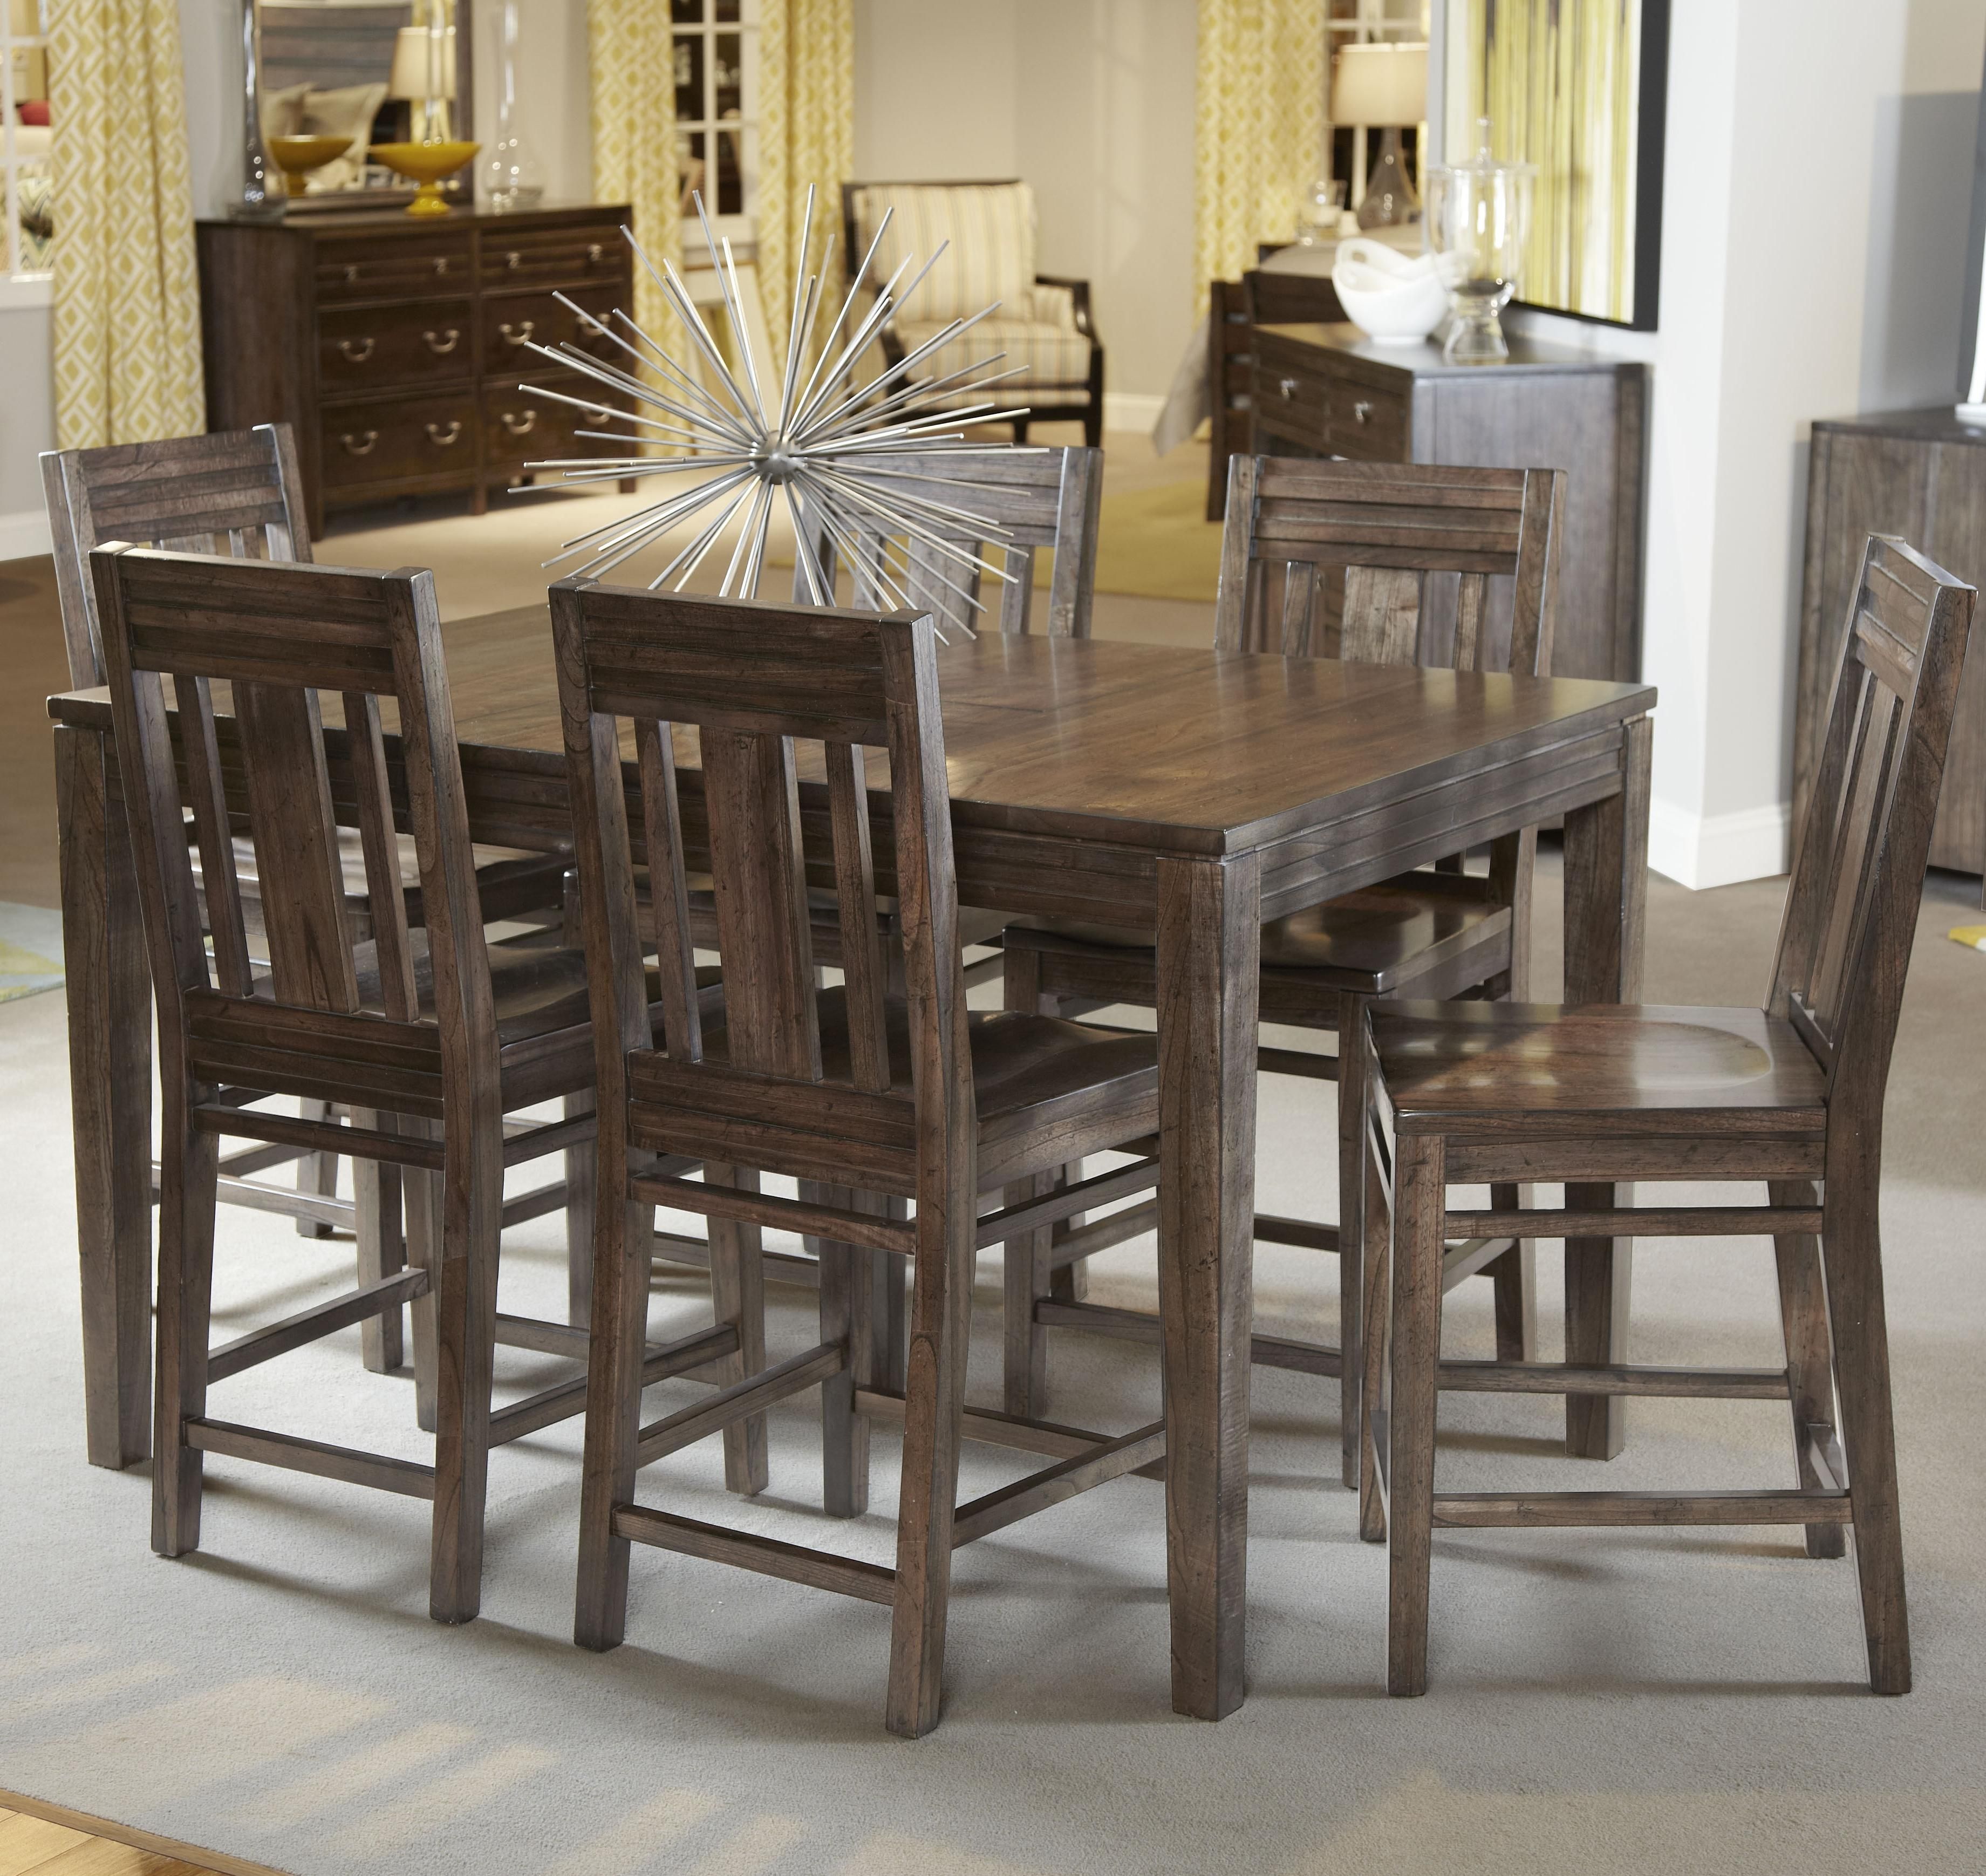 Kincaid Furniture Montreat Seven Piece Casual Counter Height Dining Pertaining To Most Popular Craftsman 7 Piece Rectangle Extension Dining Sets With Uph Side Chairs (View 6 of 20)